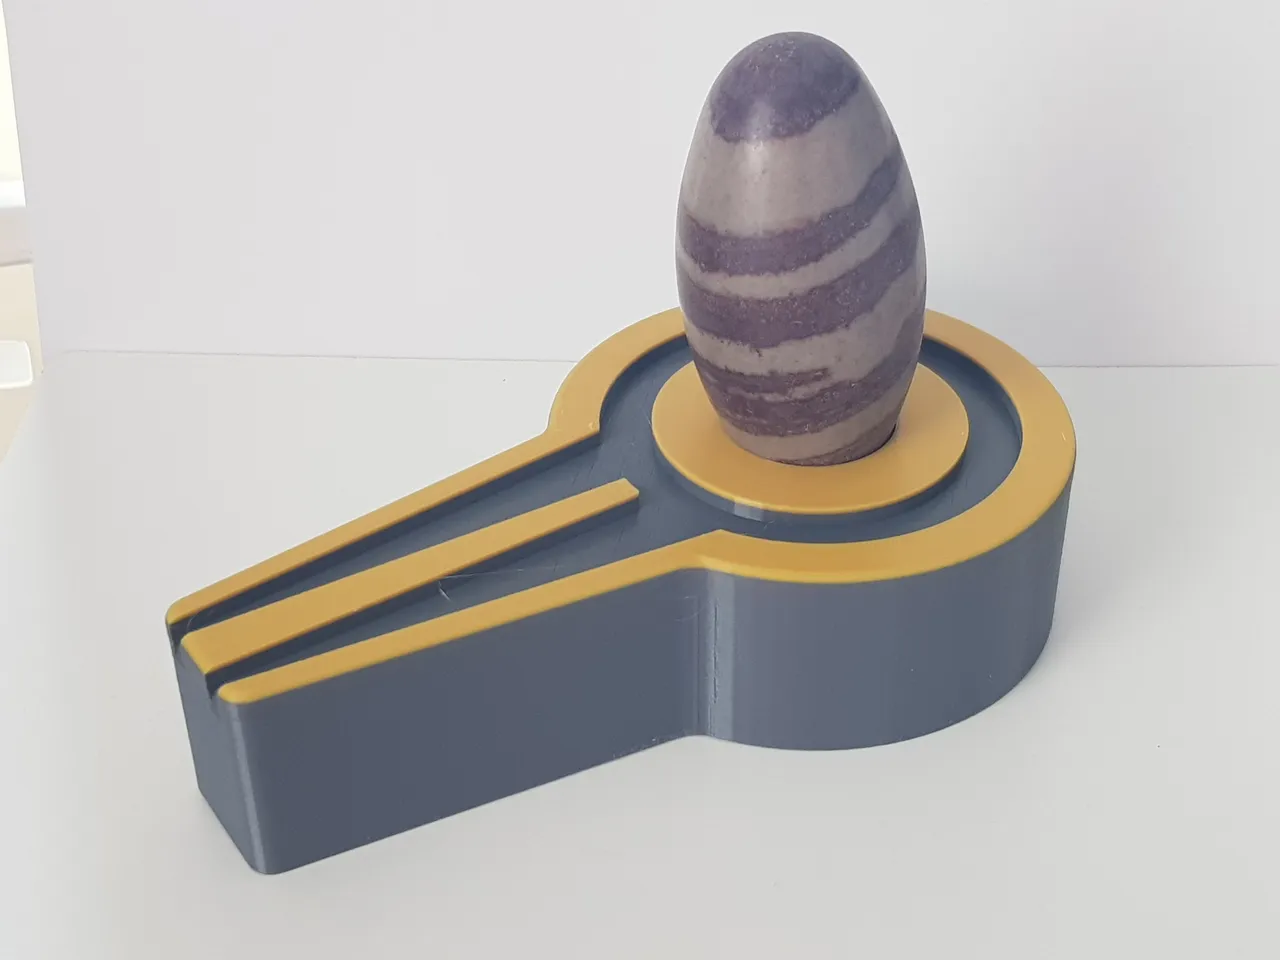 Shiva Lingam by Thierry GERARD | Download free STL model ...